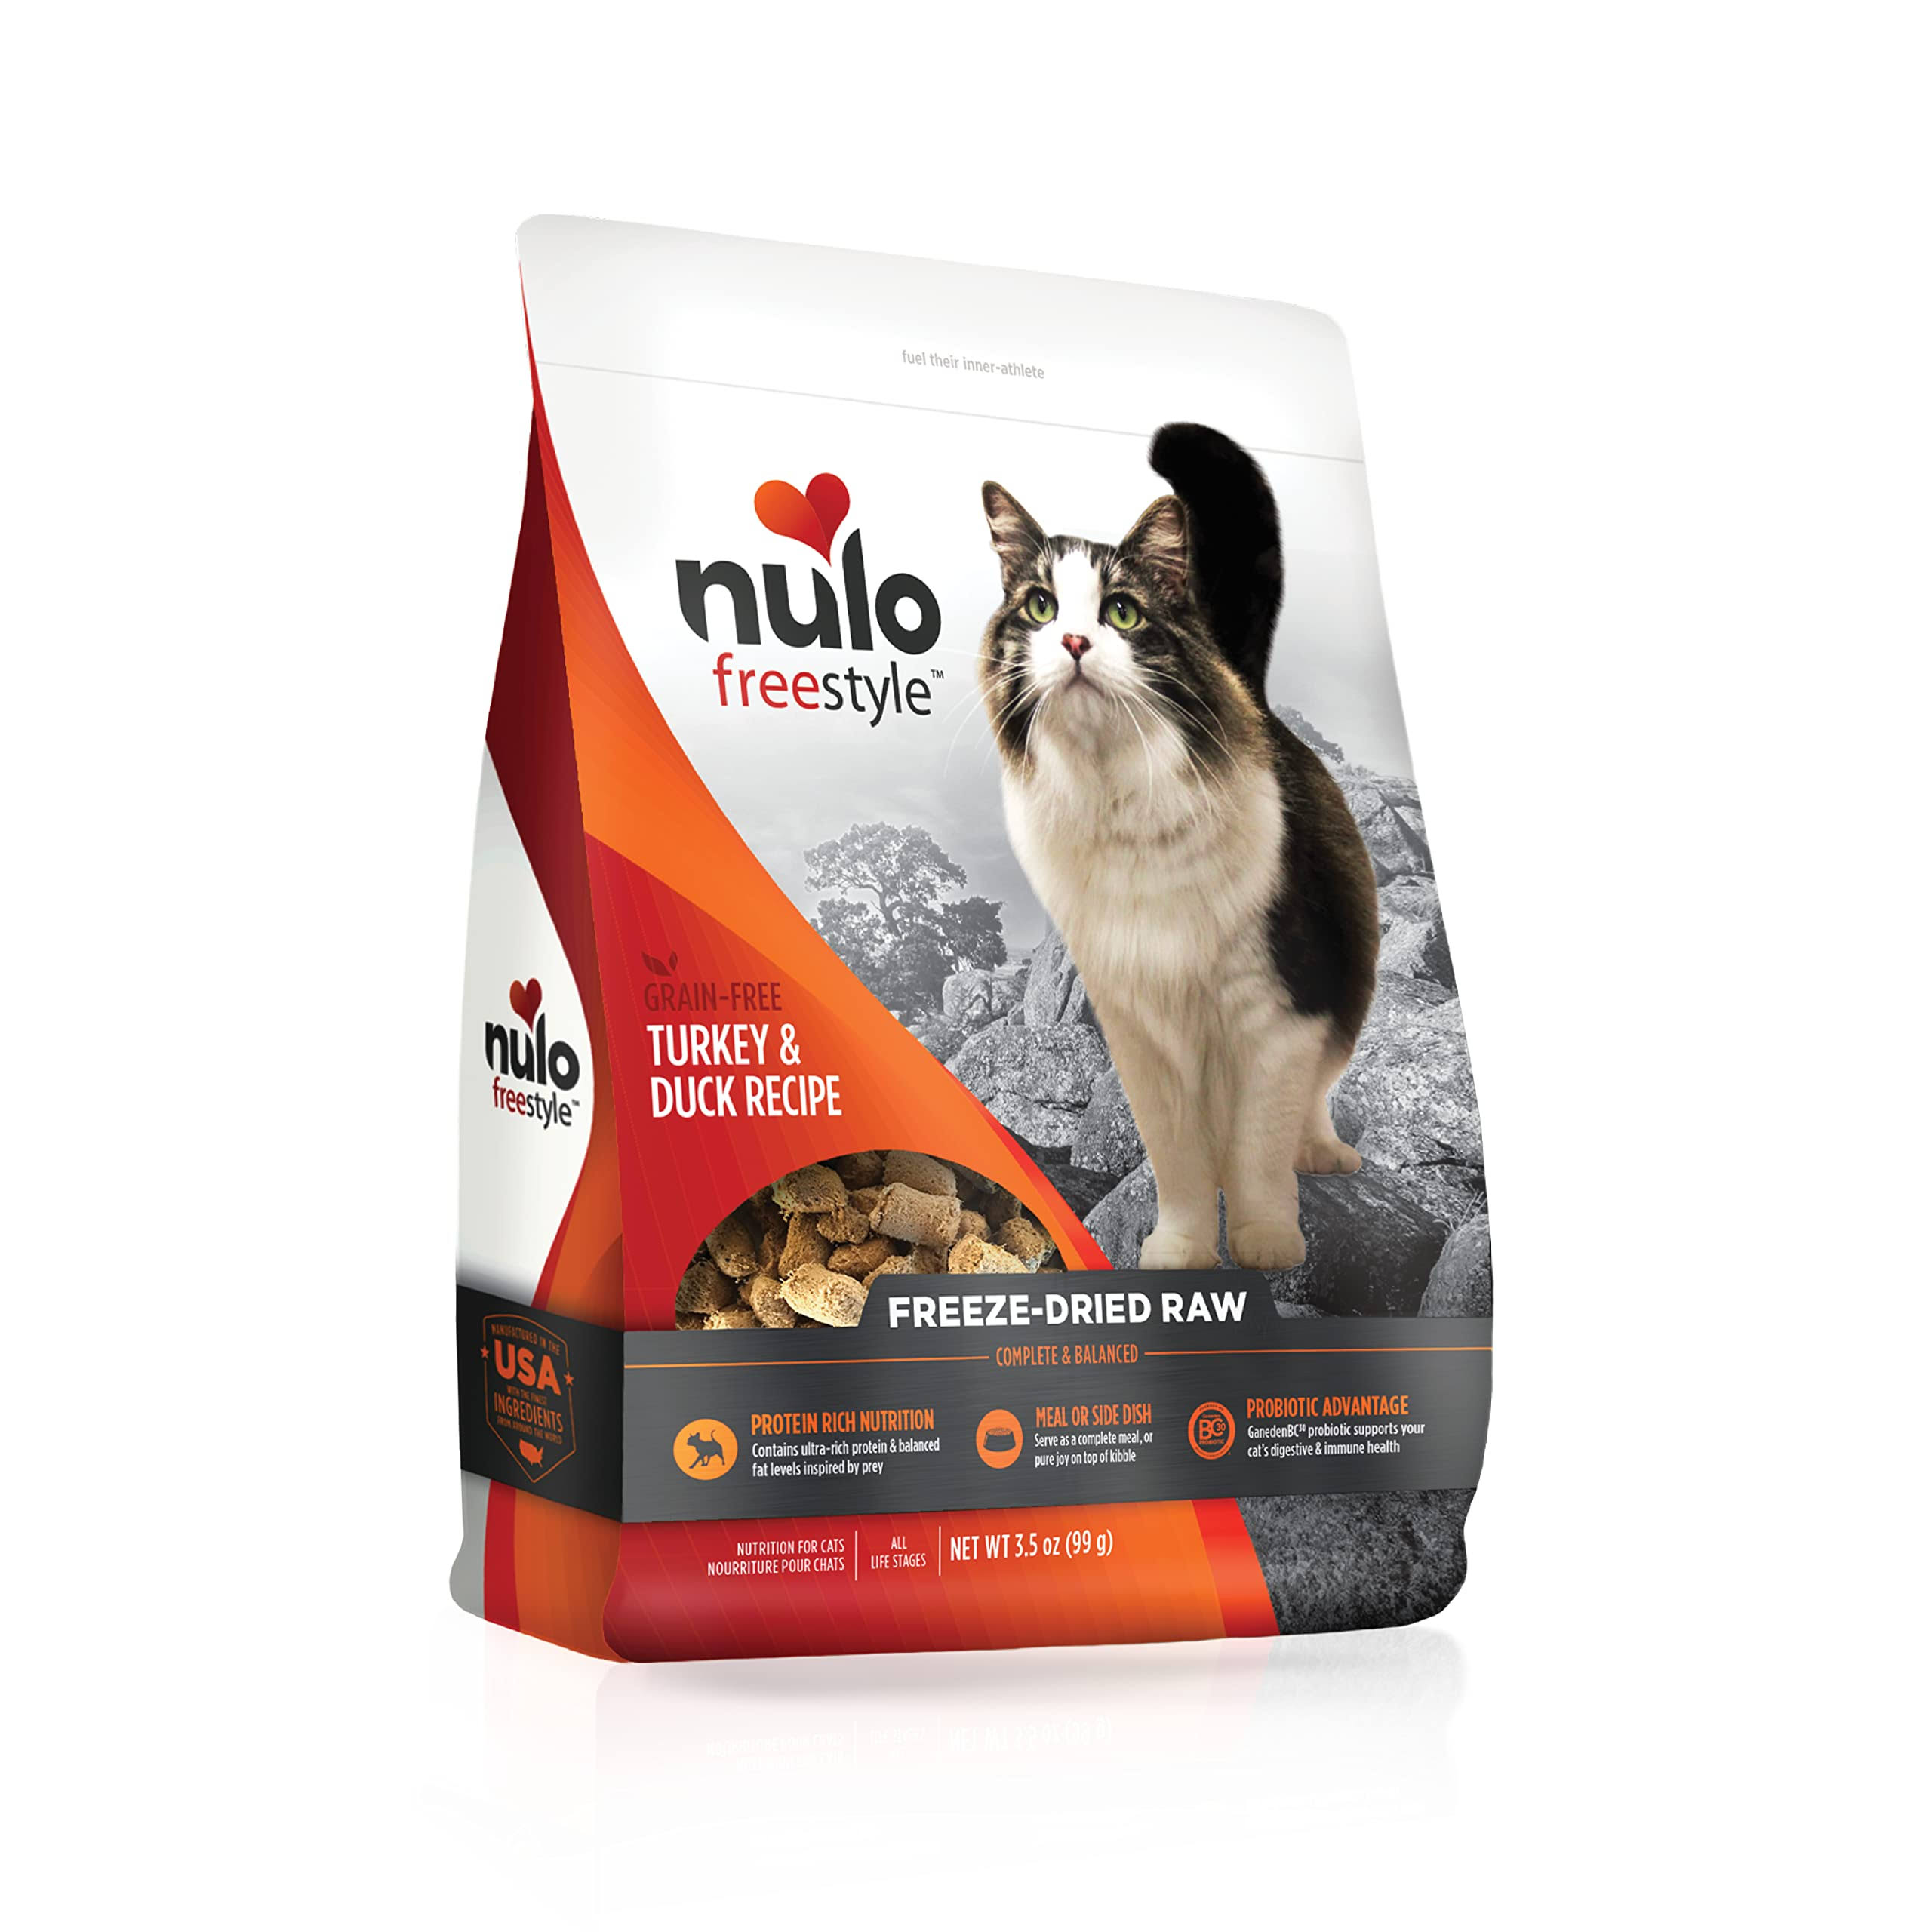 Nulo Freestyle Freeze Dried Raw Cat Food - Grain Free Cat Food with Probiotics, Ultra-Rich Protein to Support Digestive and Immune Health - Premium to